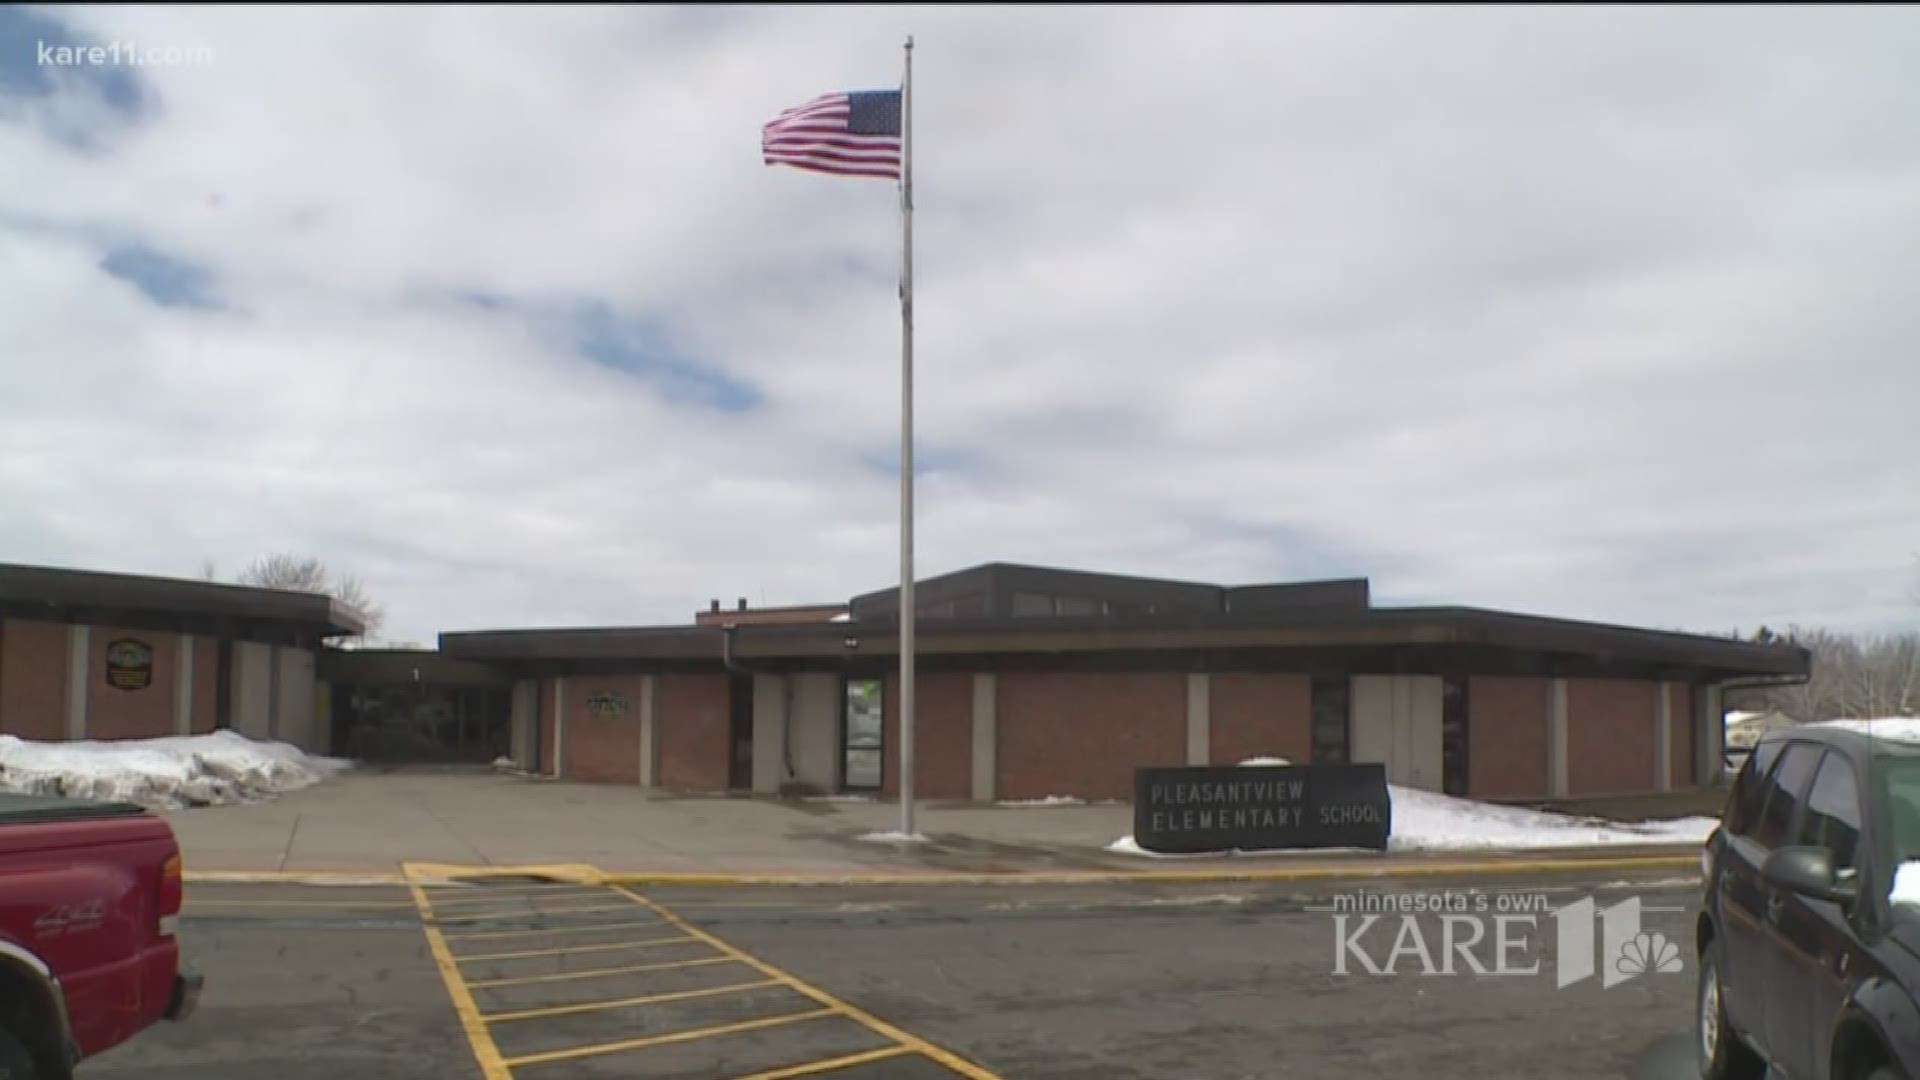 An 8-year-old student at Pleasantview Elementary School came to school with a knife Monday morning and attacked three fellow students, sending two of them to the hospital. https://kare11.tv/2J3iIBB